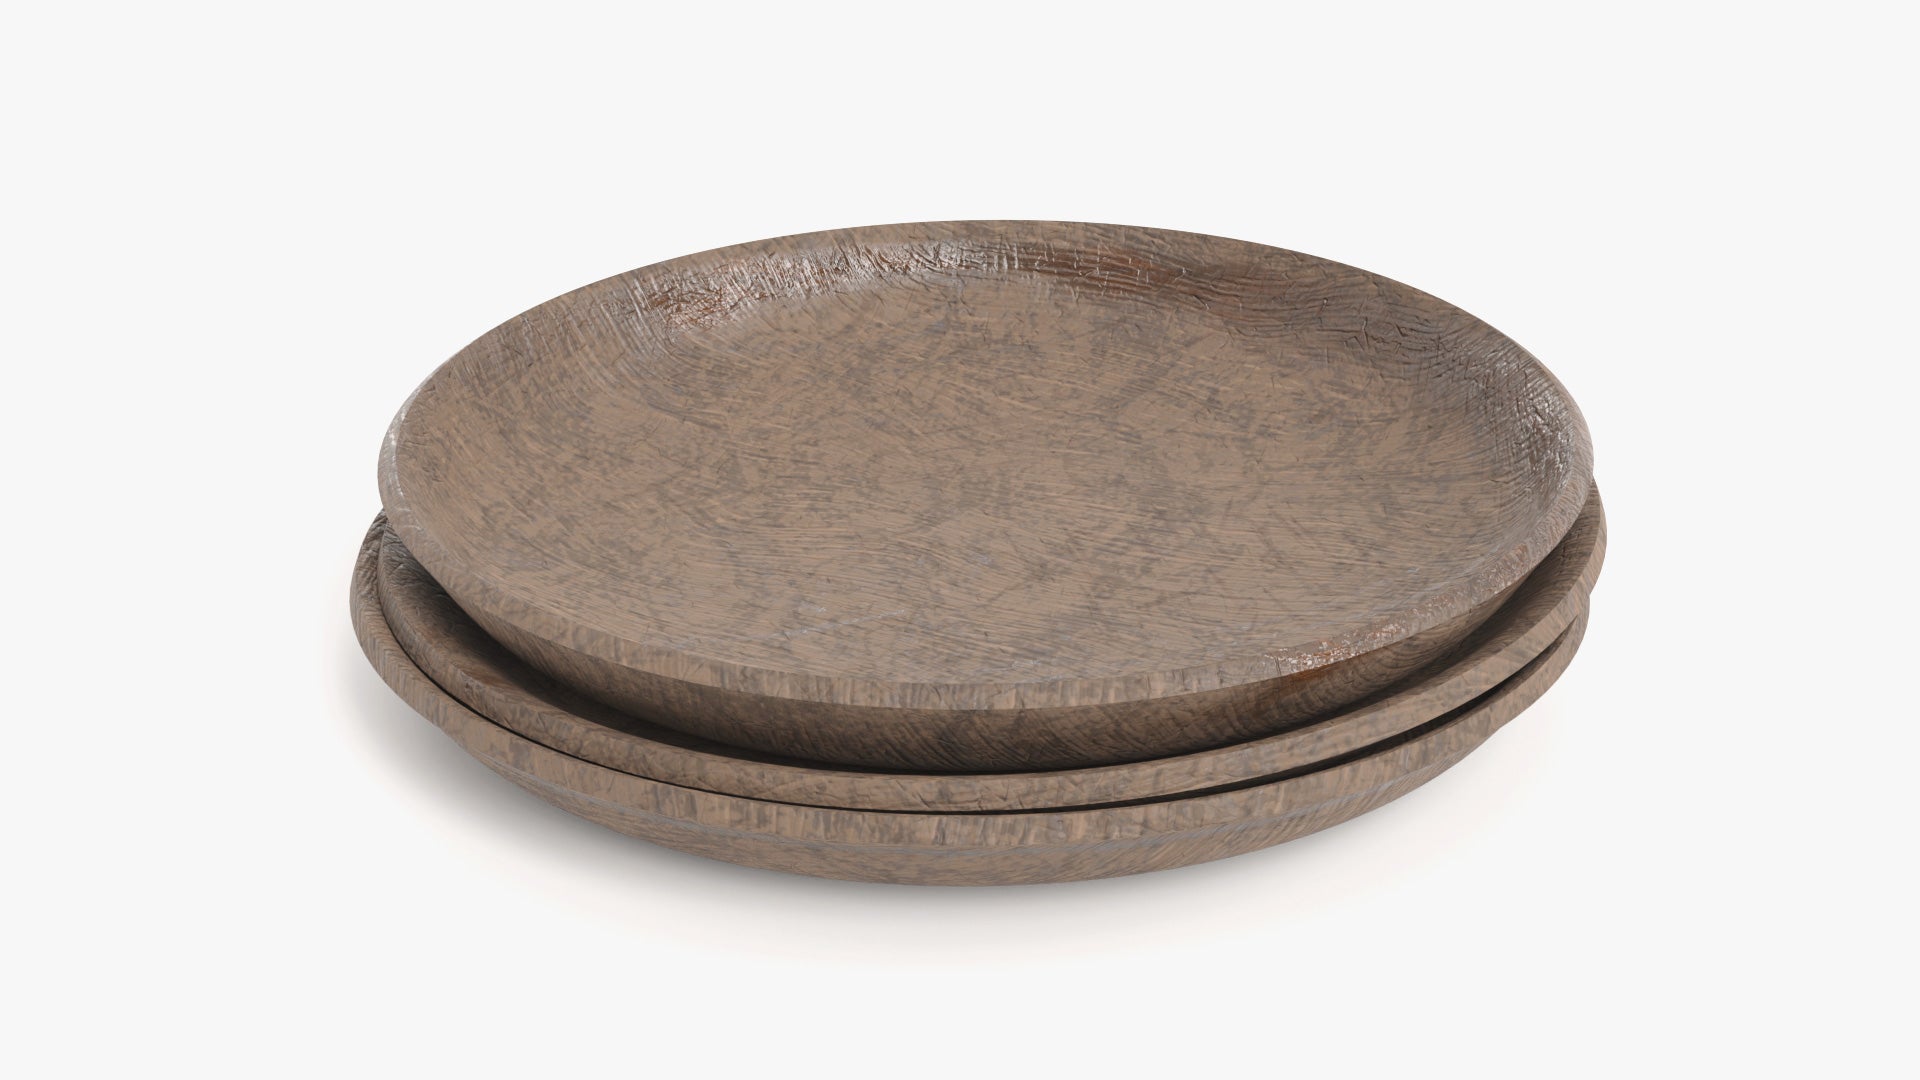 3D model of three wooden plates stacked, made of old rough wood and heavily damaged by use. They have low polycount and PBR textures, and look extremely realistic